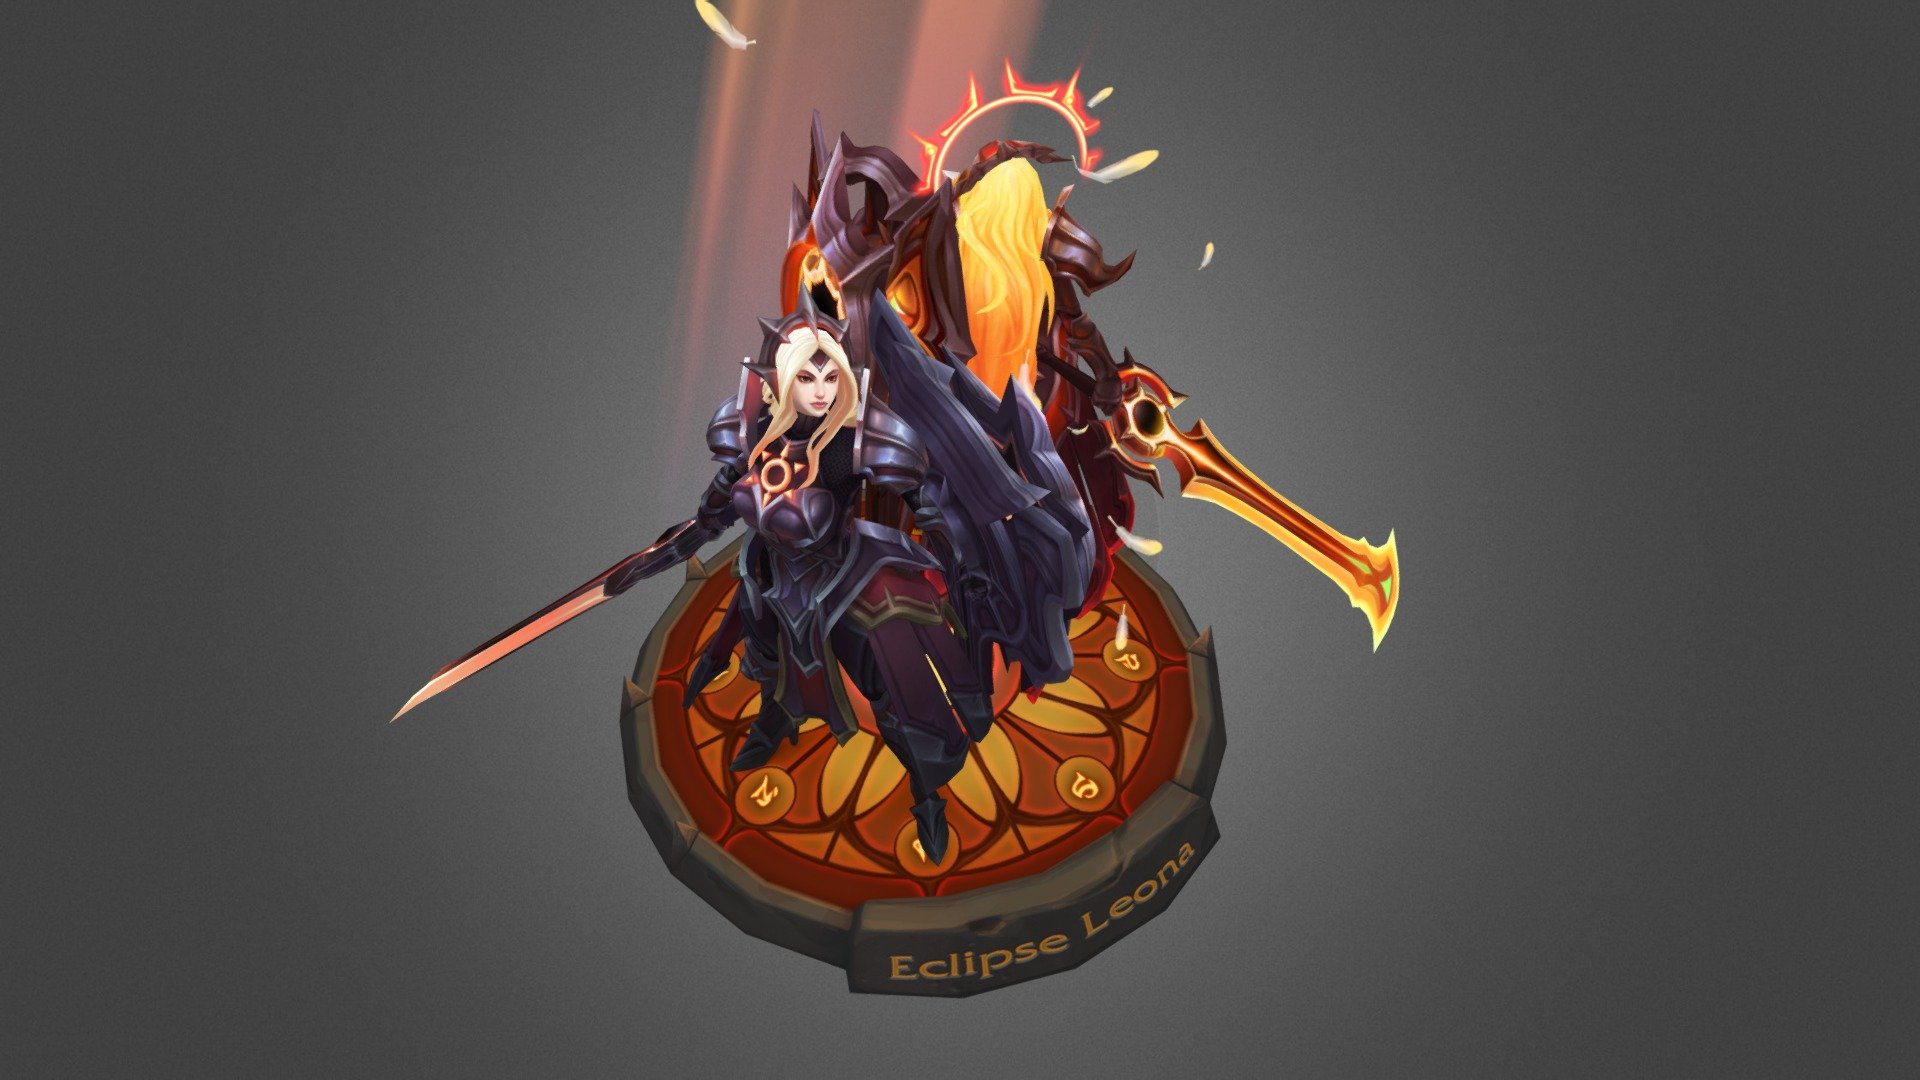 have an awesome experience working on Eclipse Leona. The iron maiden warrior is always a cool thematic. The team is also full of talented and passionate members 3d model